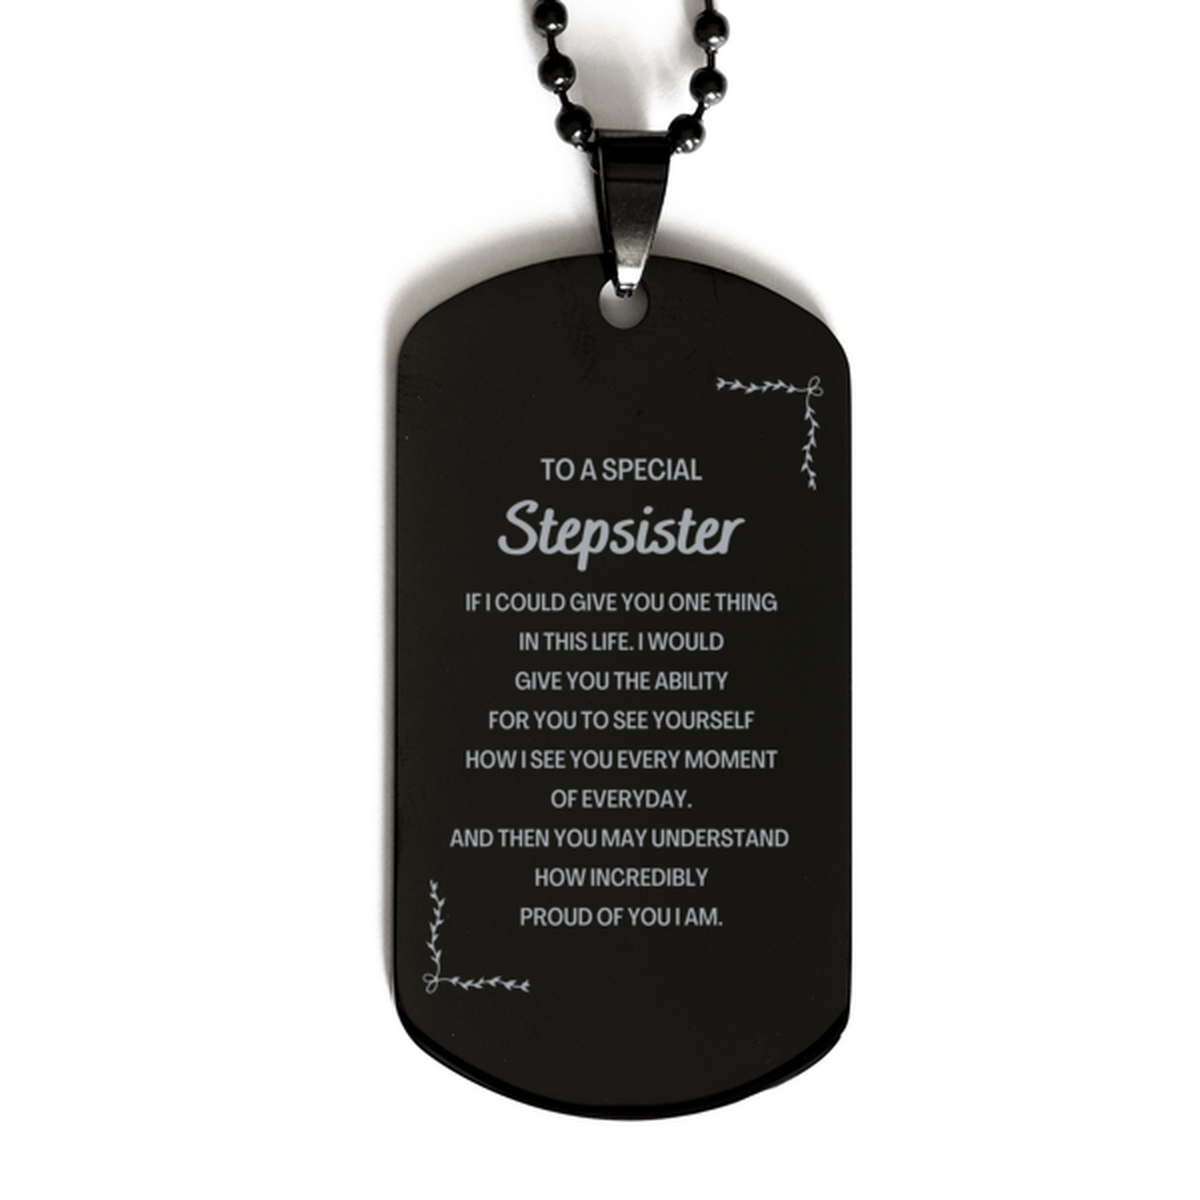 To My Stepsister Black Dog Tag, Gifts For Stepsister Engraved, Inspirational Gifts for Christmas Birthday, Epic Gifts for Stepsister To A Special Stepsister how incredibly proud of you I am